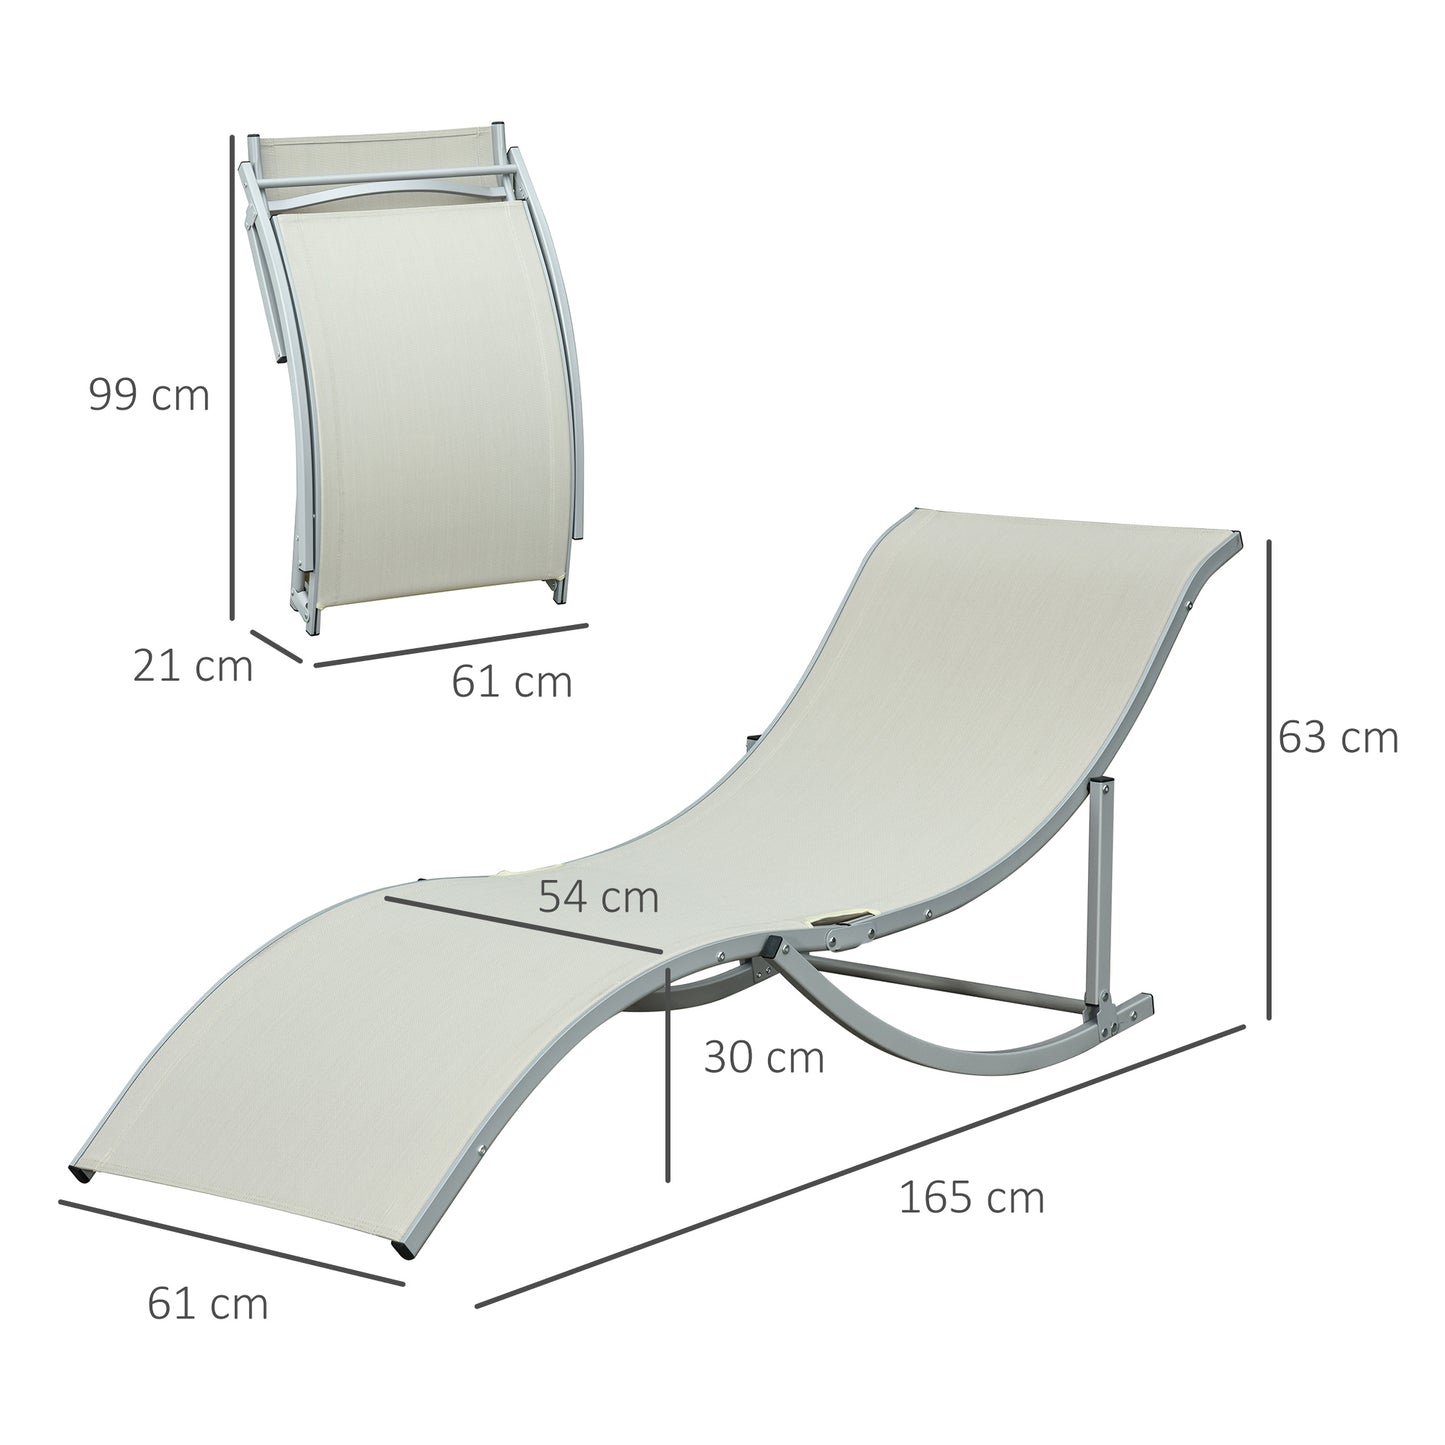 Outsunny Set of 2 S-shaped Foldable Lounge Chair Sun Lounger Reclining Outdoor Chair for Patio Beach Garden Beige